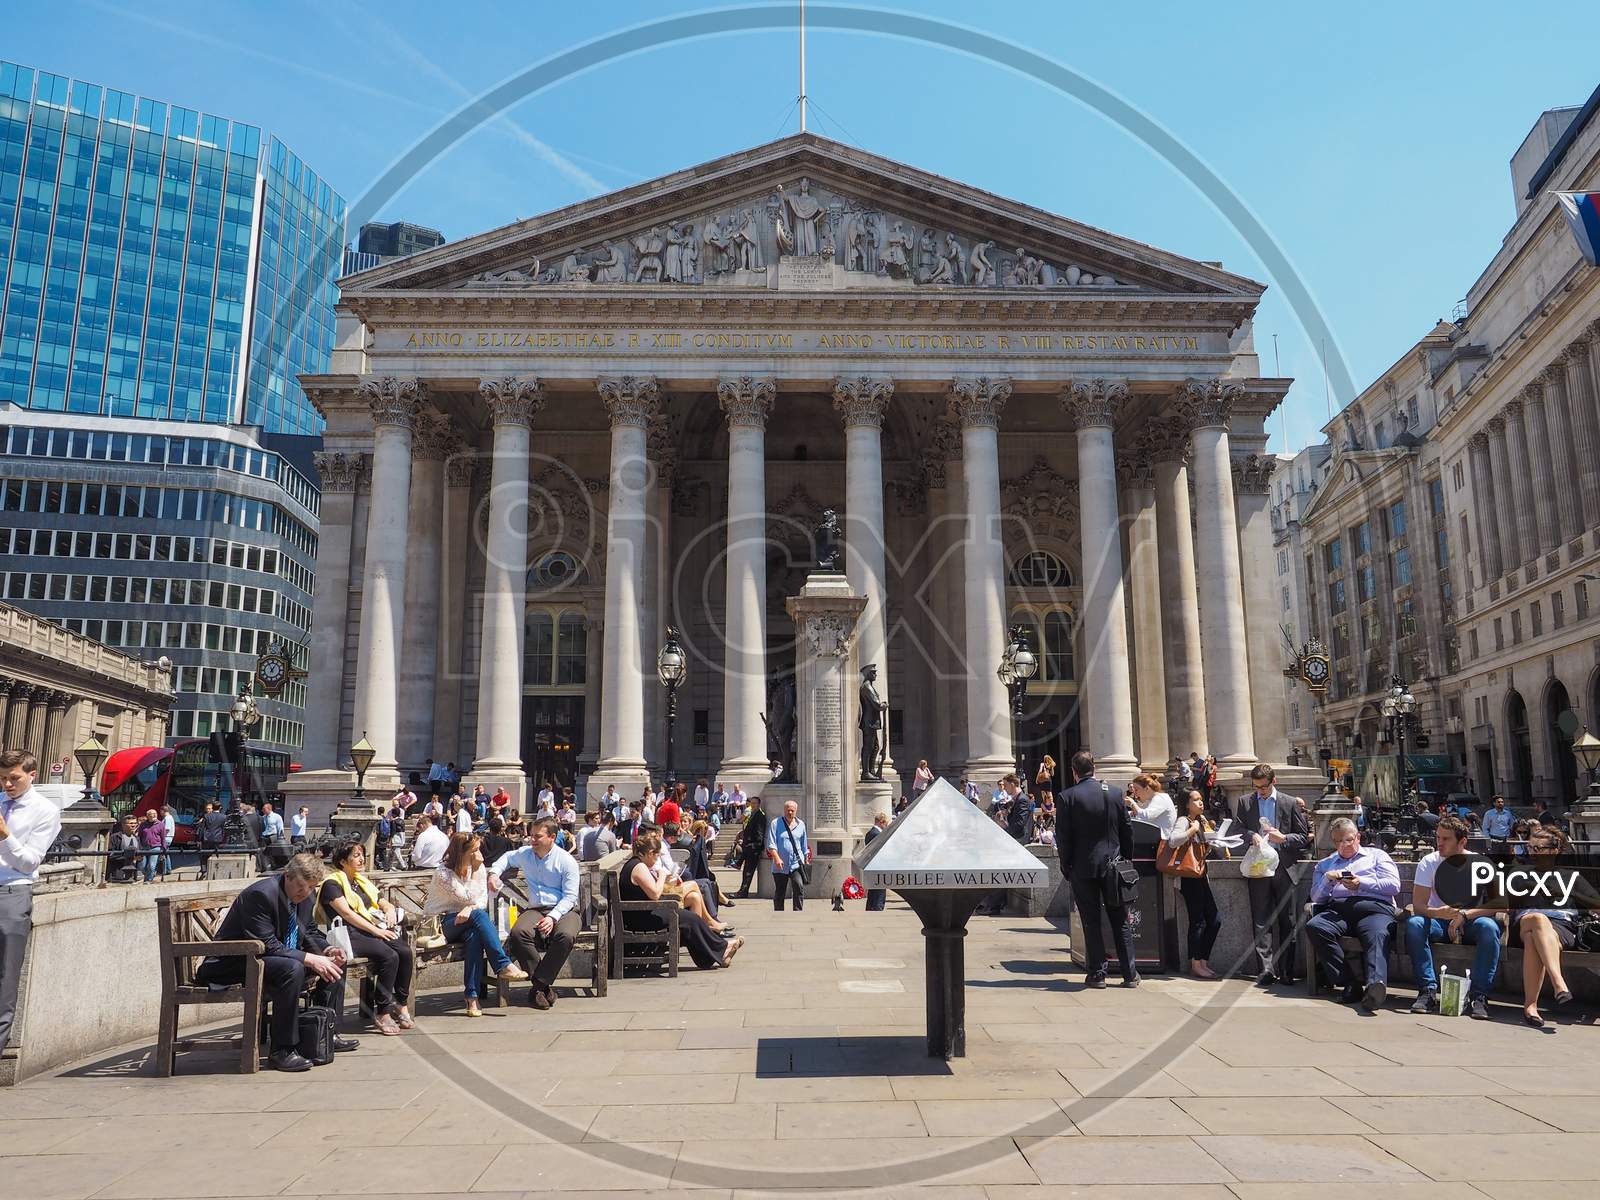 London, Uk - June 11, 2015: People In Front Of The Royal Stock Exchange